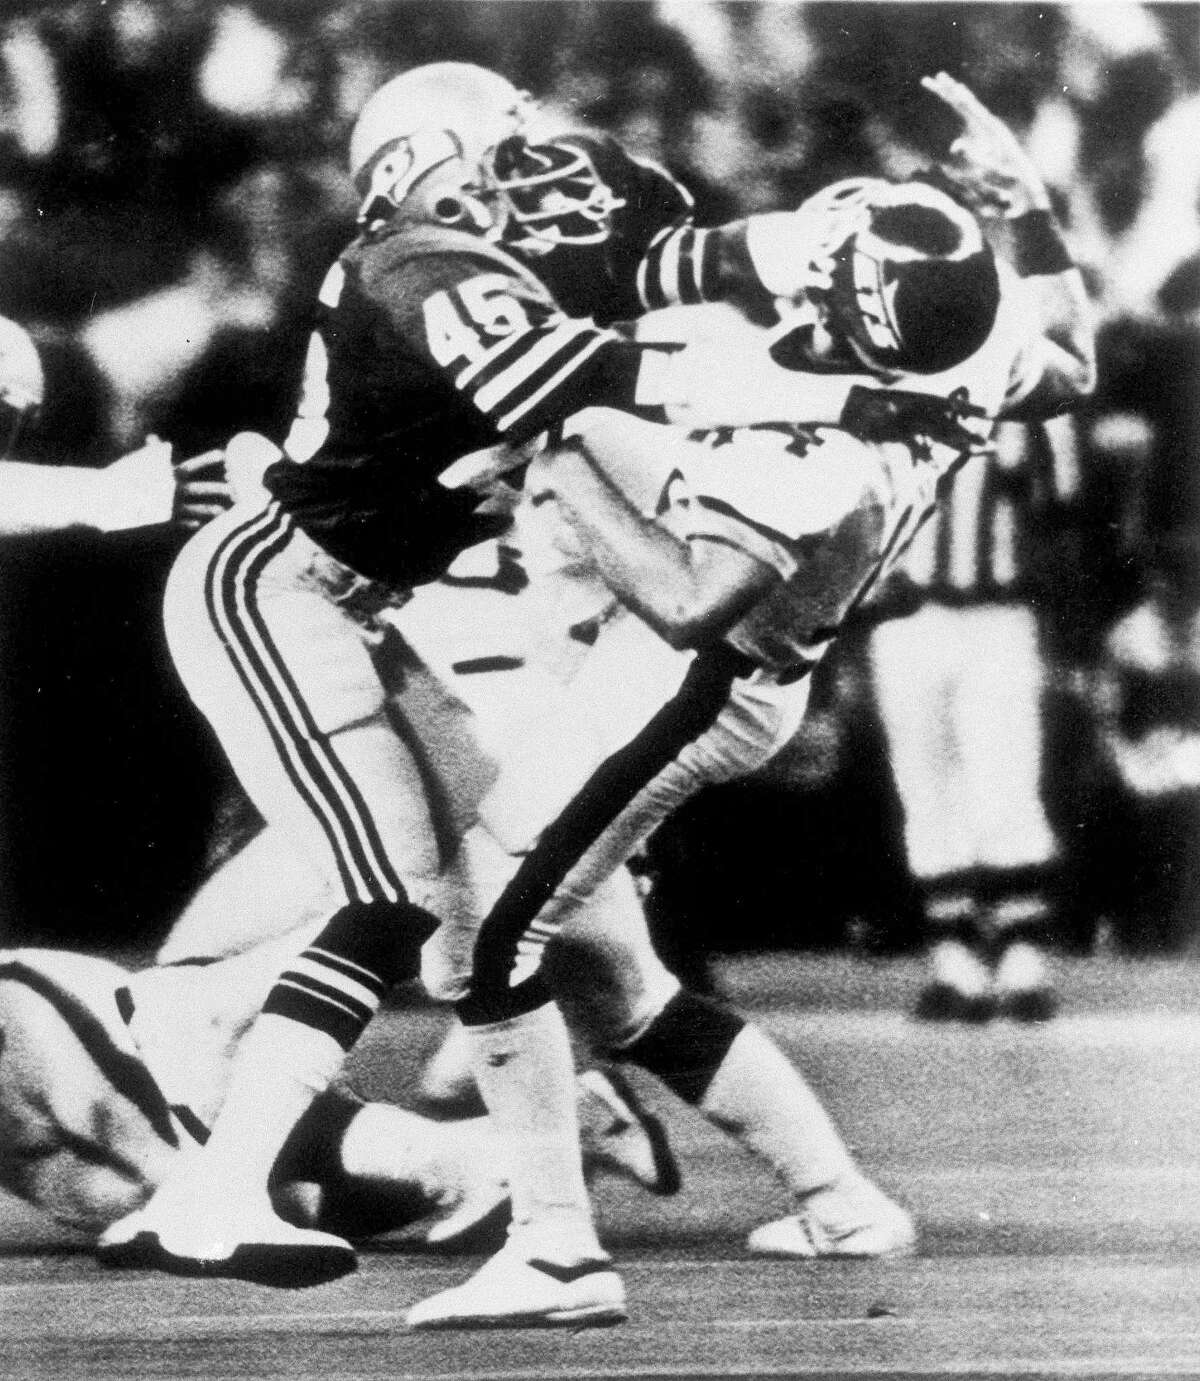 FILE - In this Dec. 6, 1981, file photo, Seattle Seahawks safety Kenny Easley (45) knocks New York Jets quarterback Richard Todd (14) to the ground during the first half of an NFL football game in Seattle. Easley is to to inducted Saturday at the Pro Football Hall of Fame. (AP Photo/File)